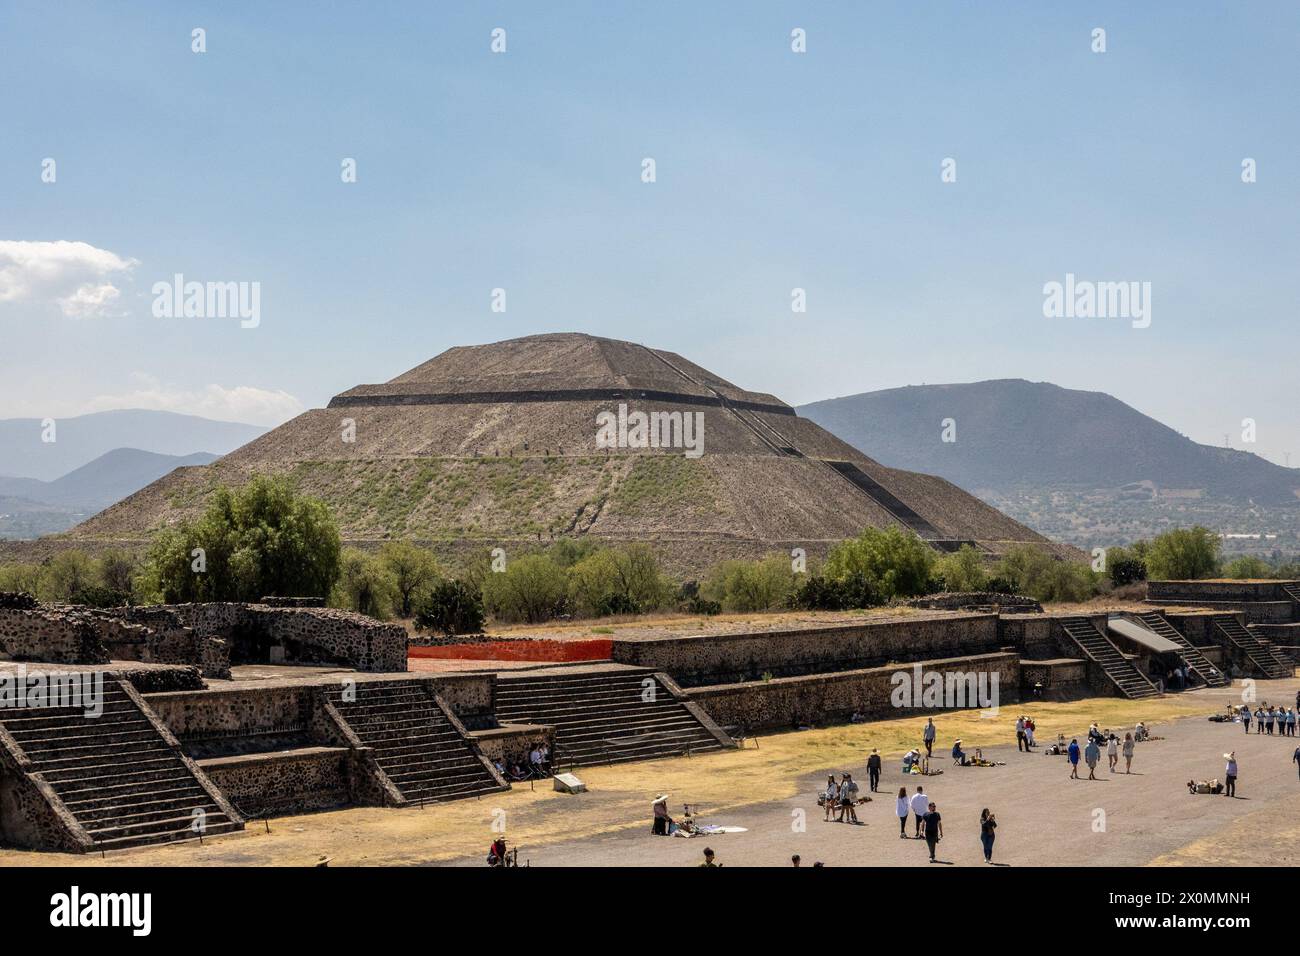 Tourists explore Teotihuacán, ancient Mesoamerican city famous for its impressive pyramids, including the Pyramid of the Sun and the Pyramid of the Moon. Stock Photo